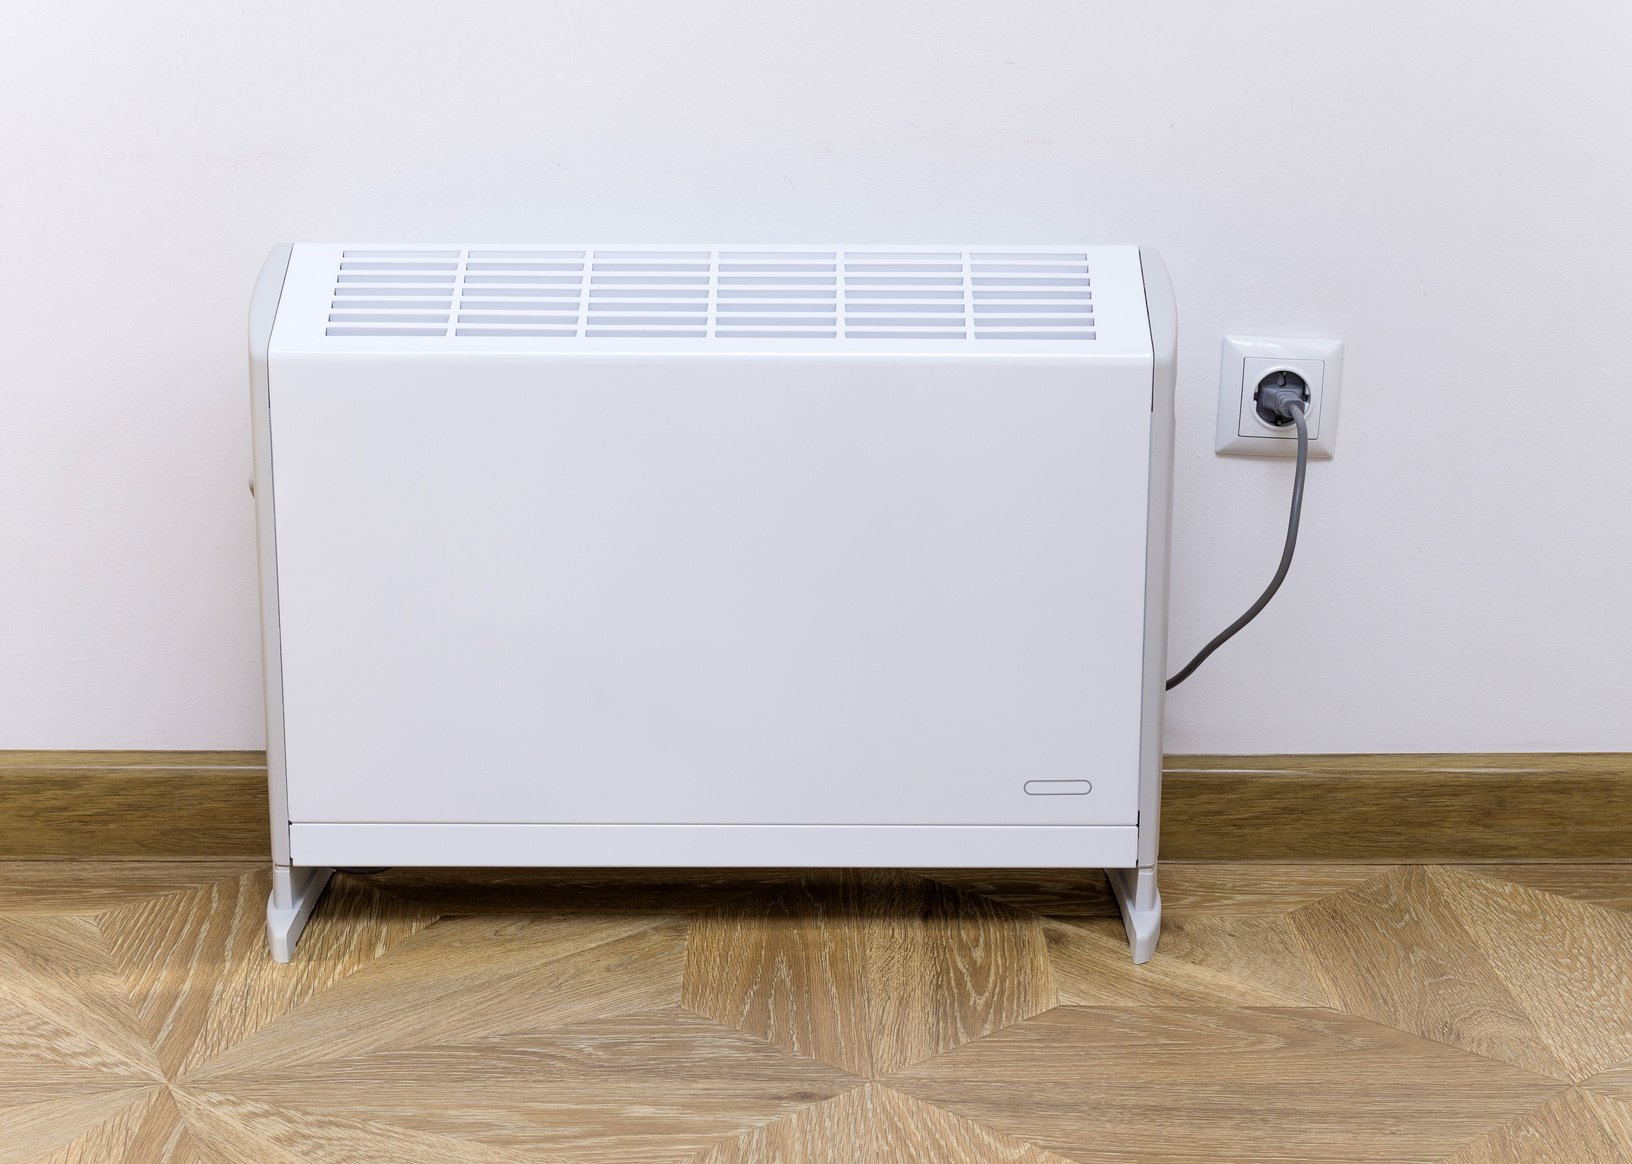 Modern electric home heating appliance